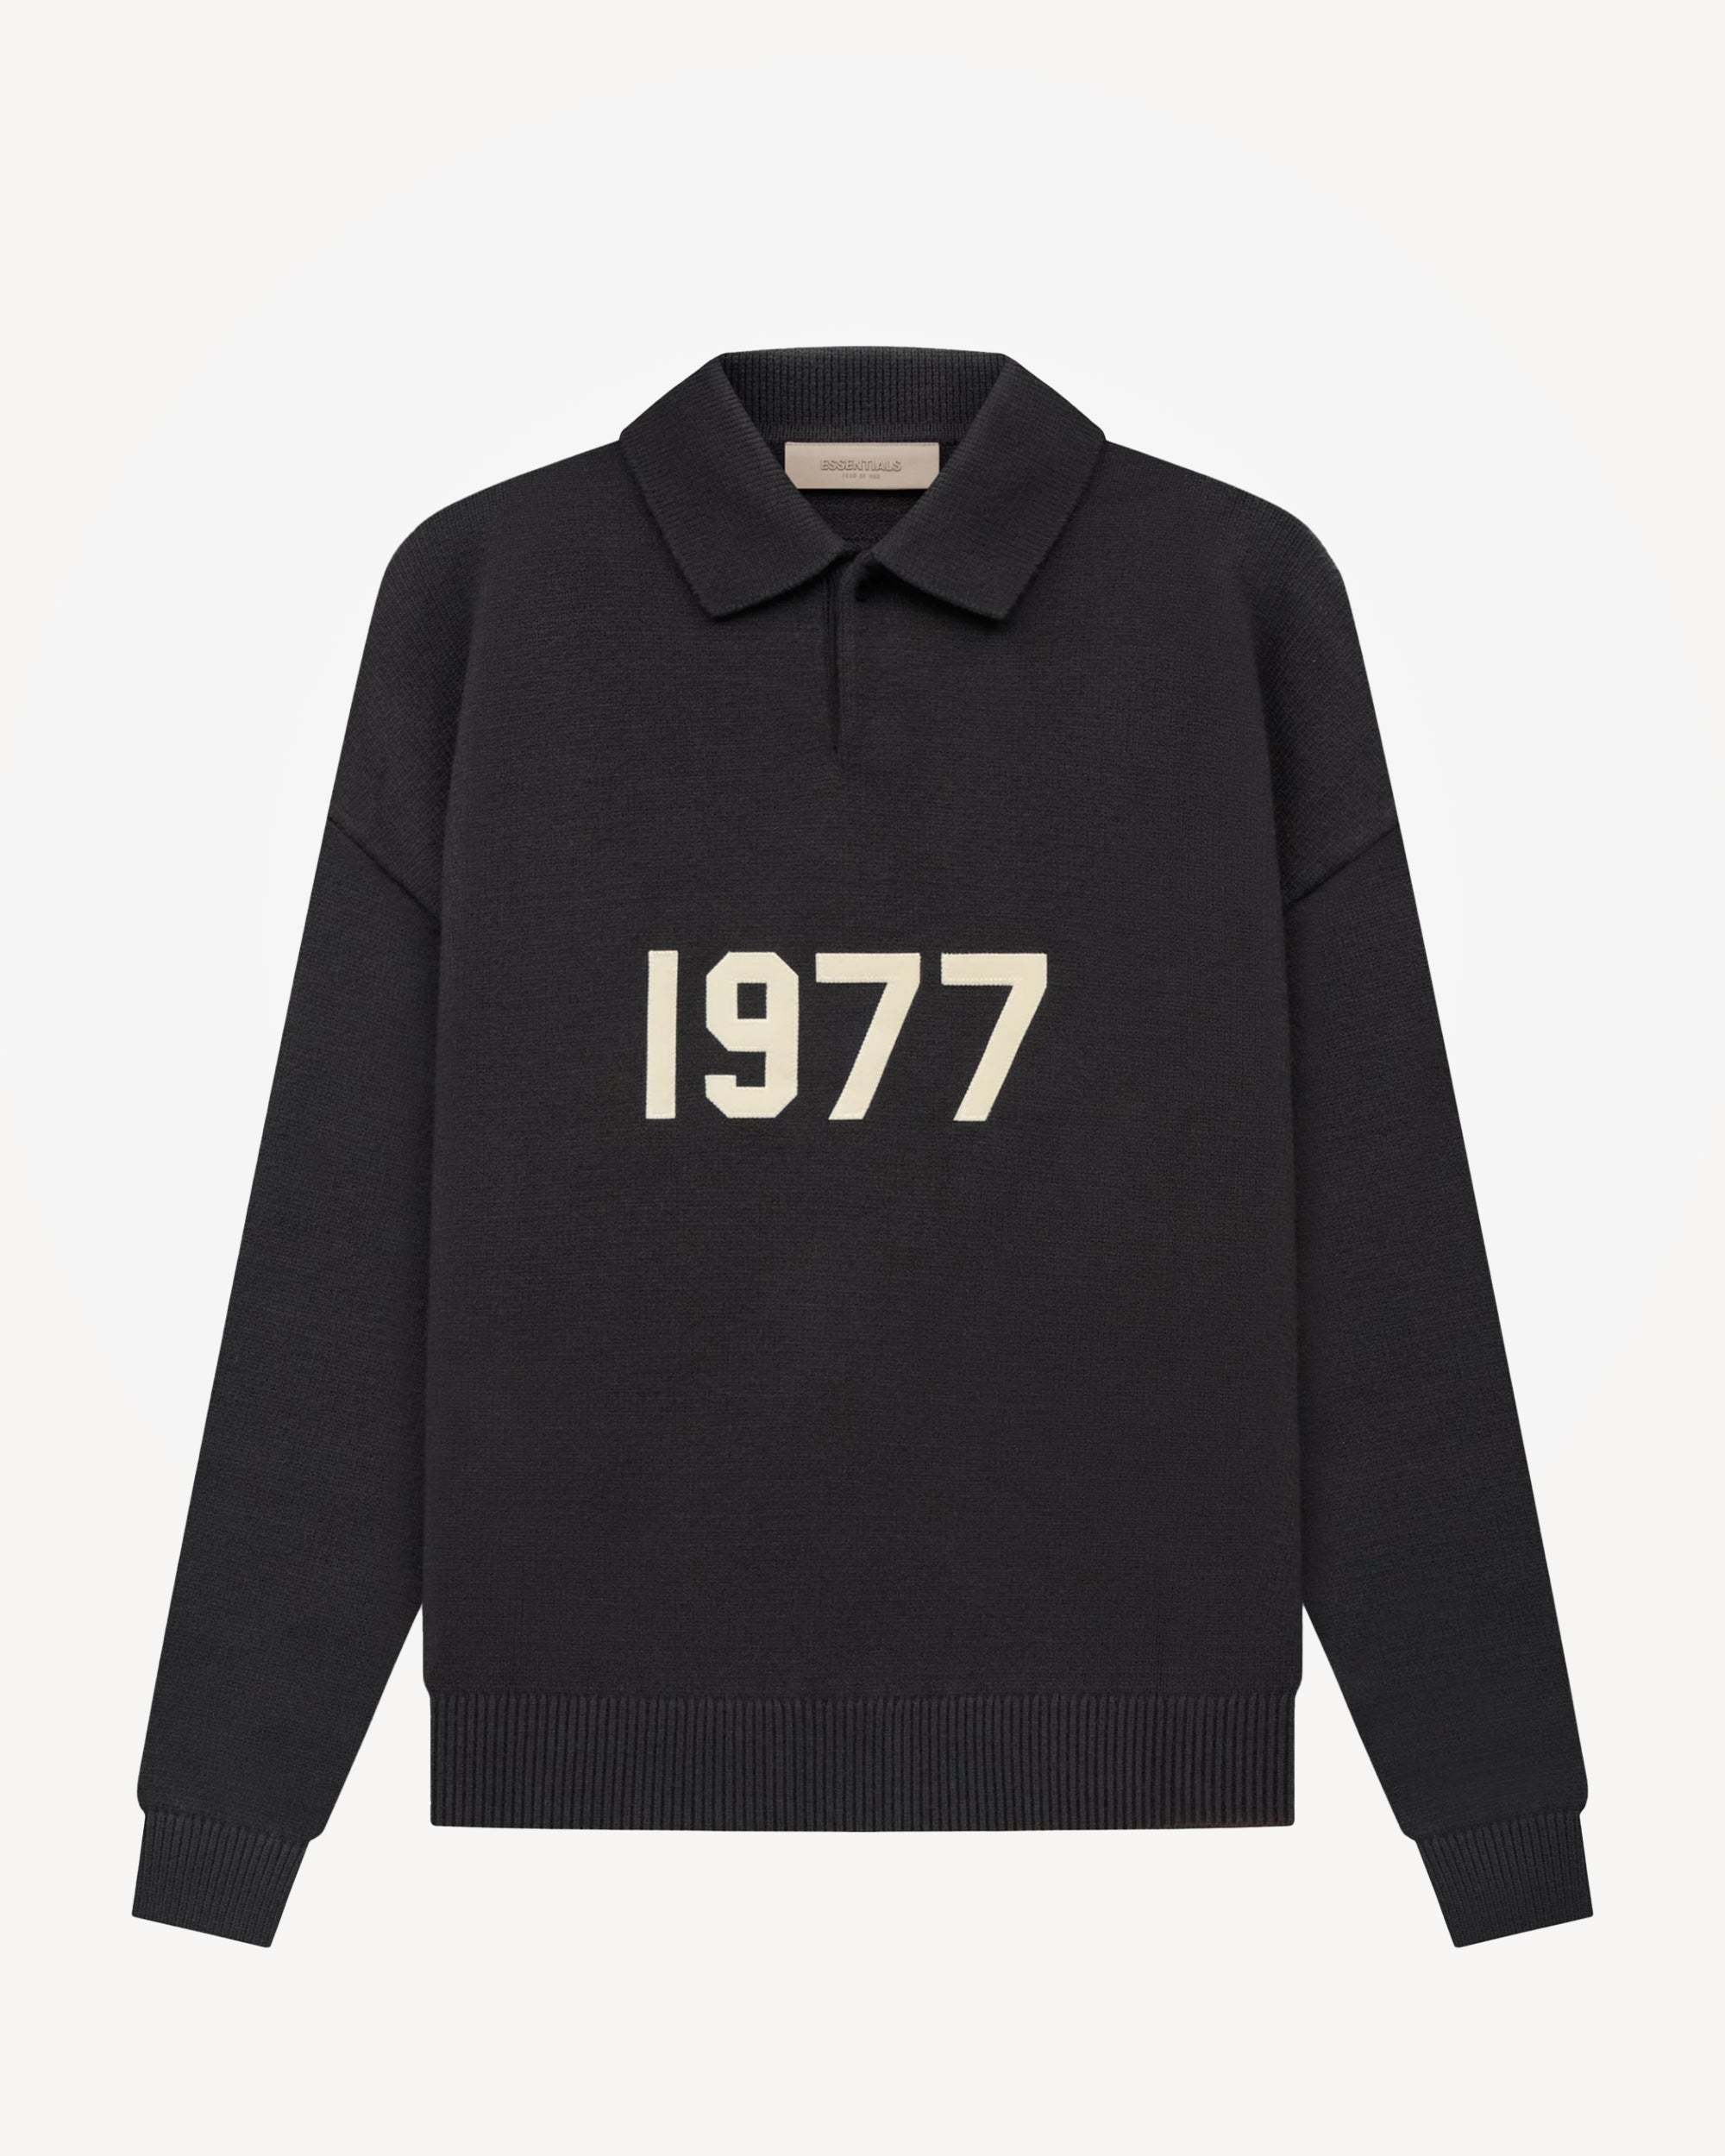 Men's "1977" Knit LS Polo in Iron